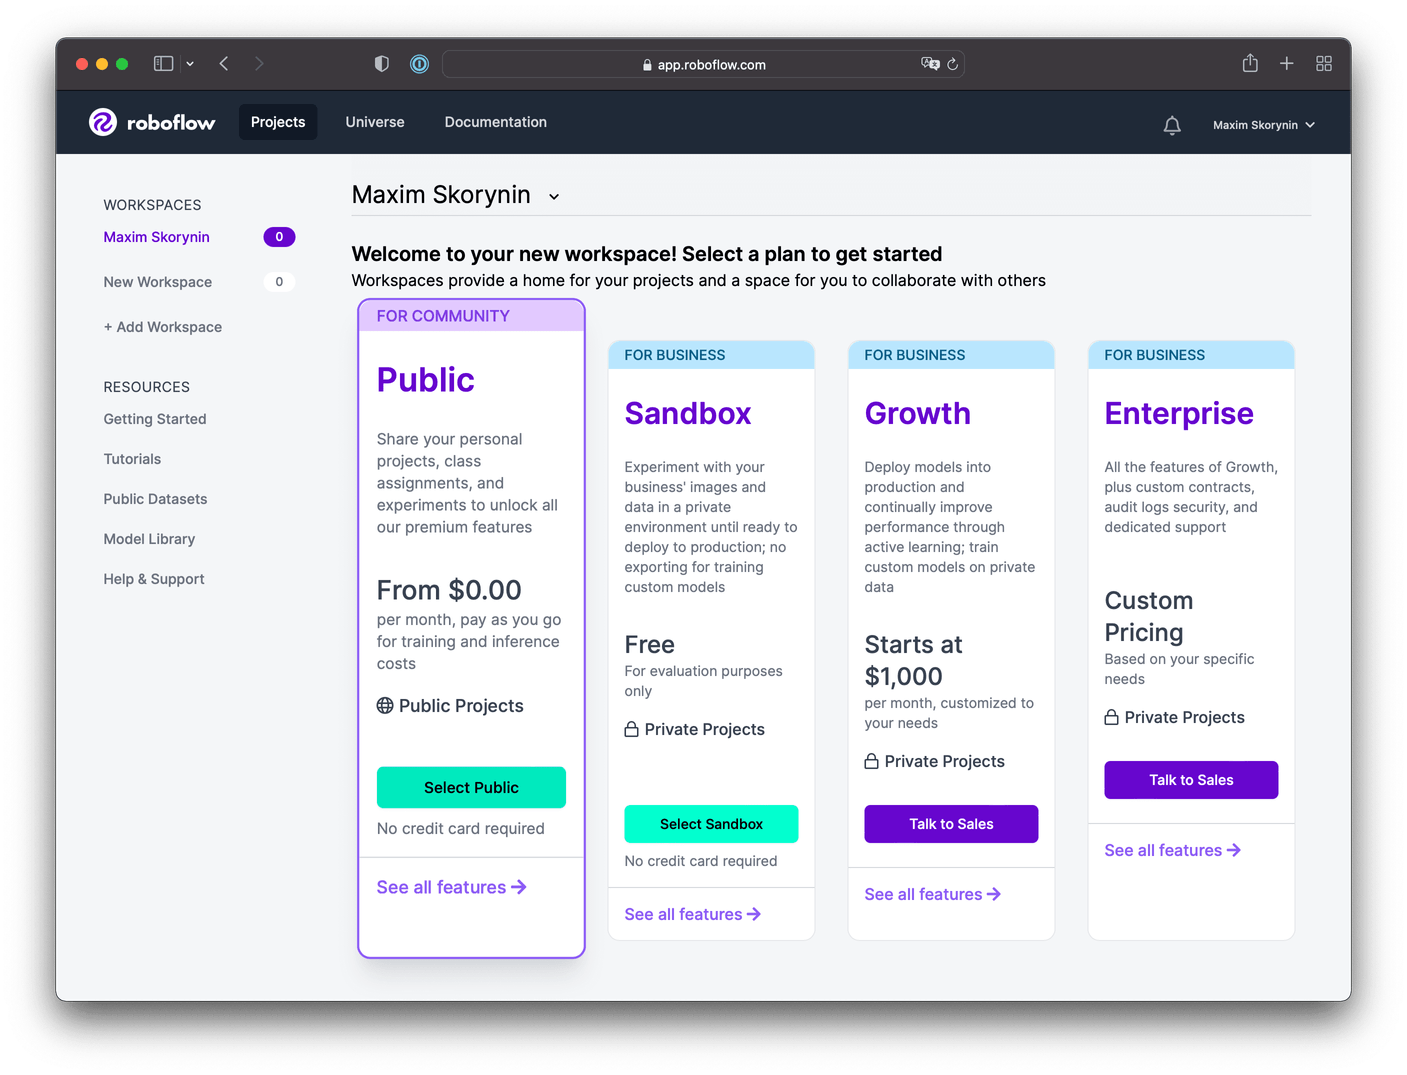 A menu displaying the available Roboflow plans and payment options